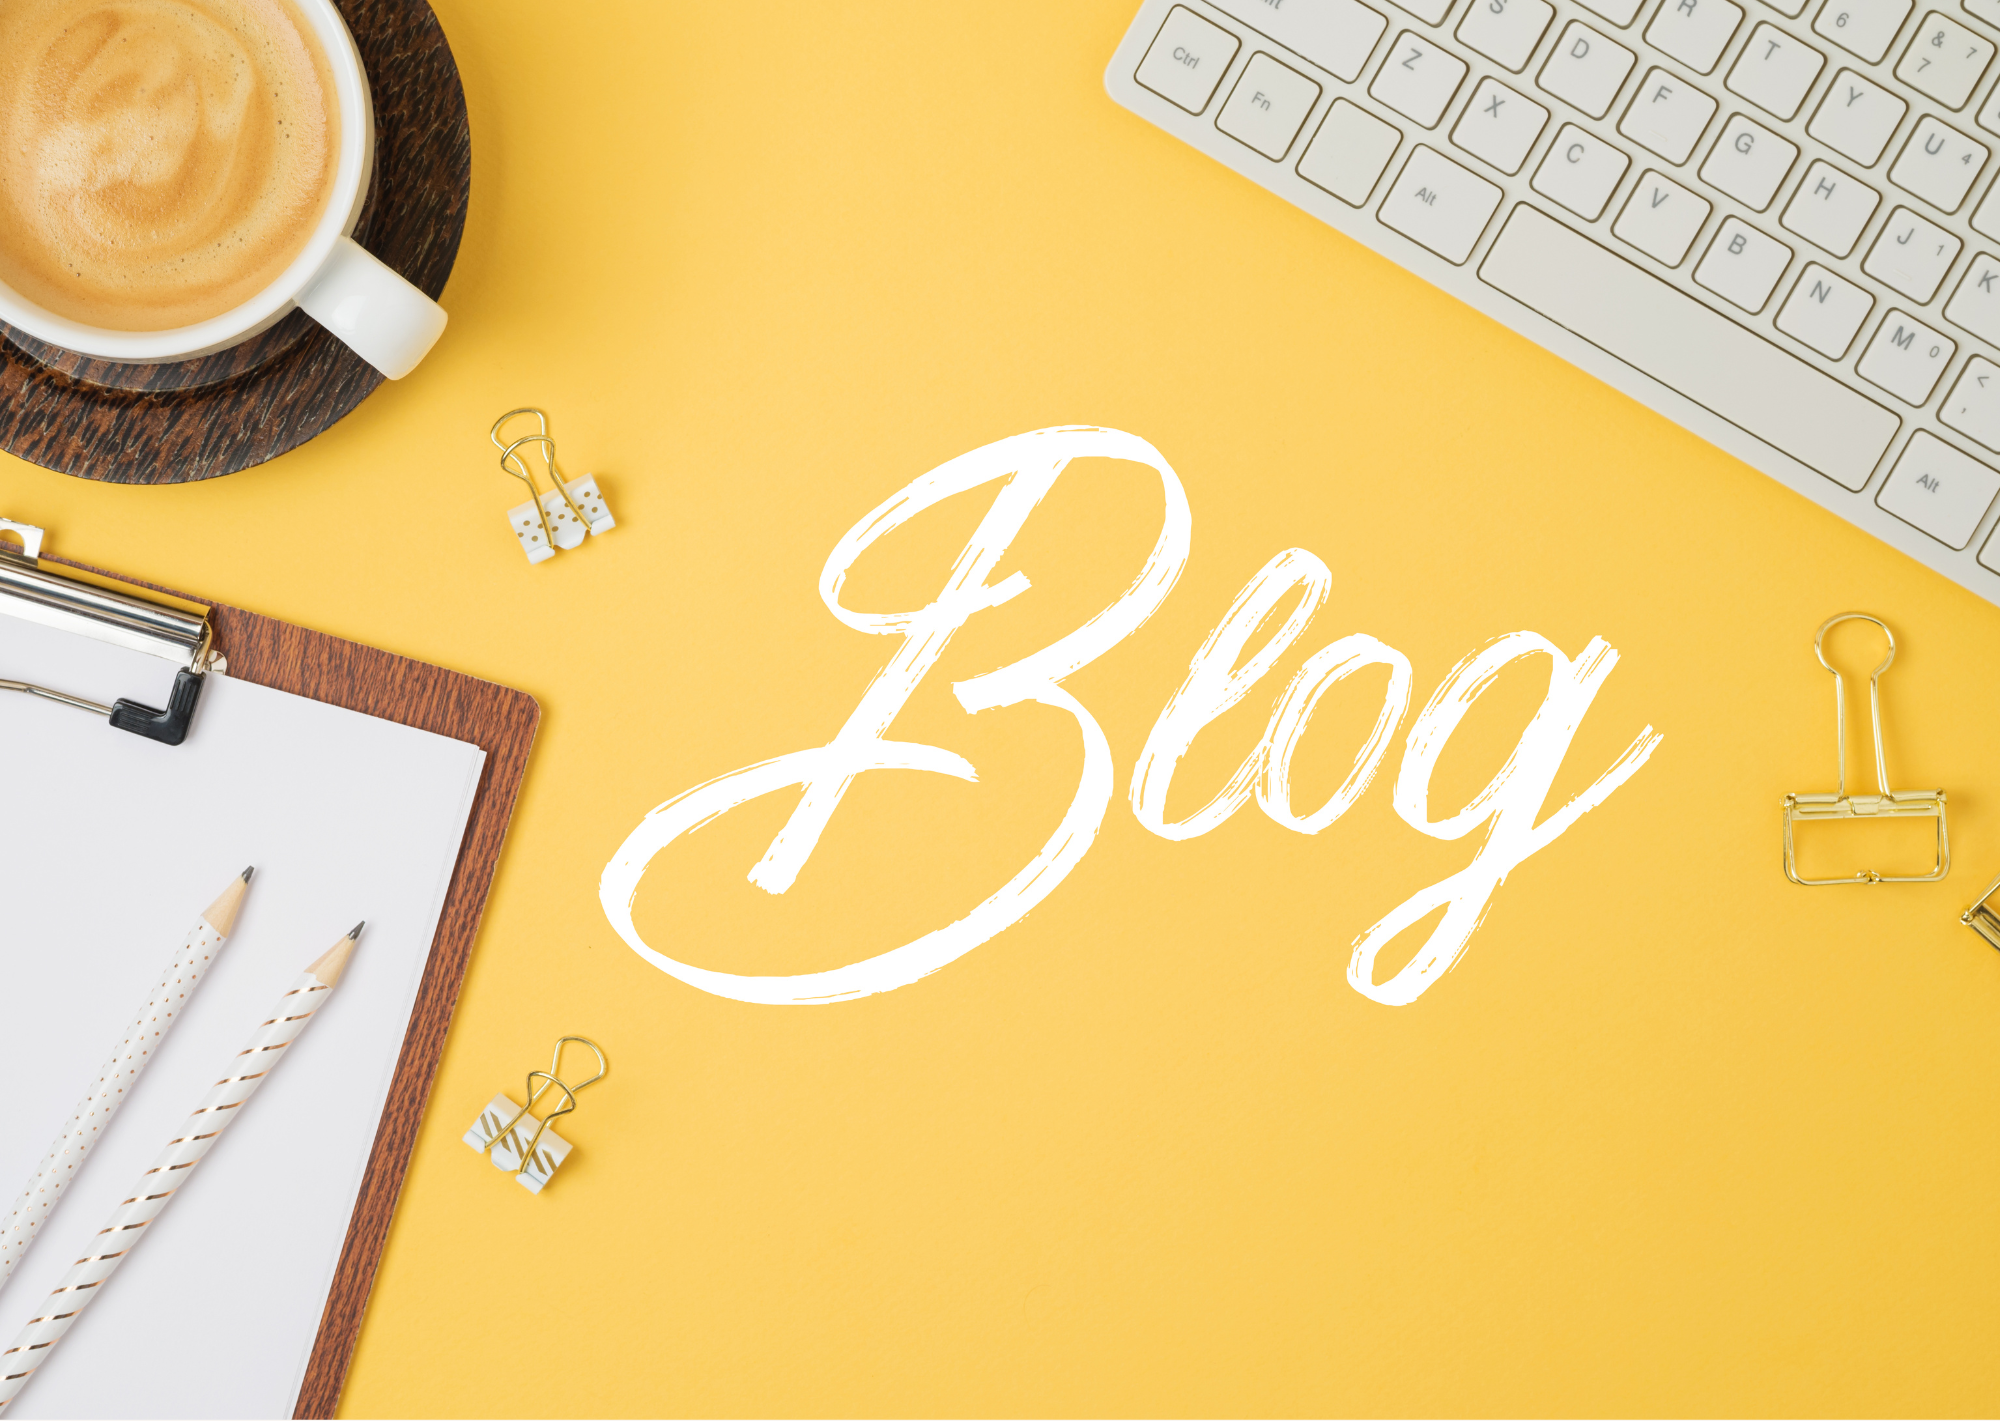 6 fresh ideas for your business blog